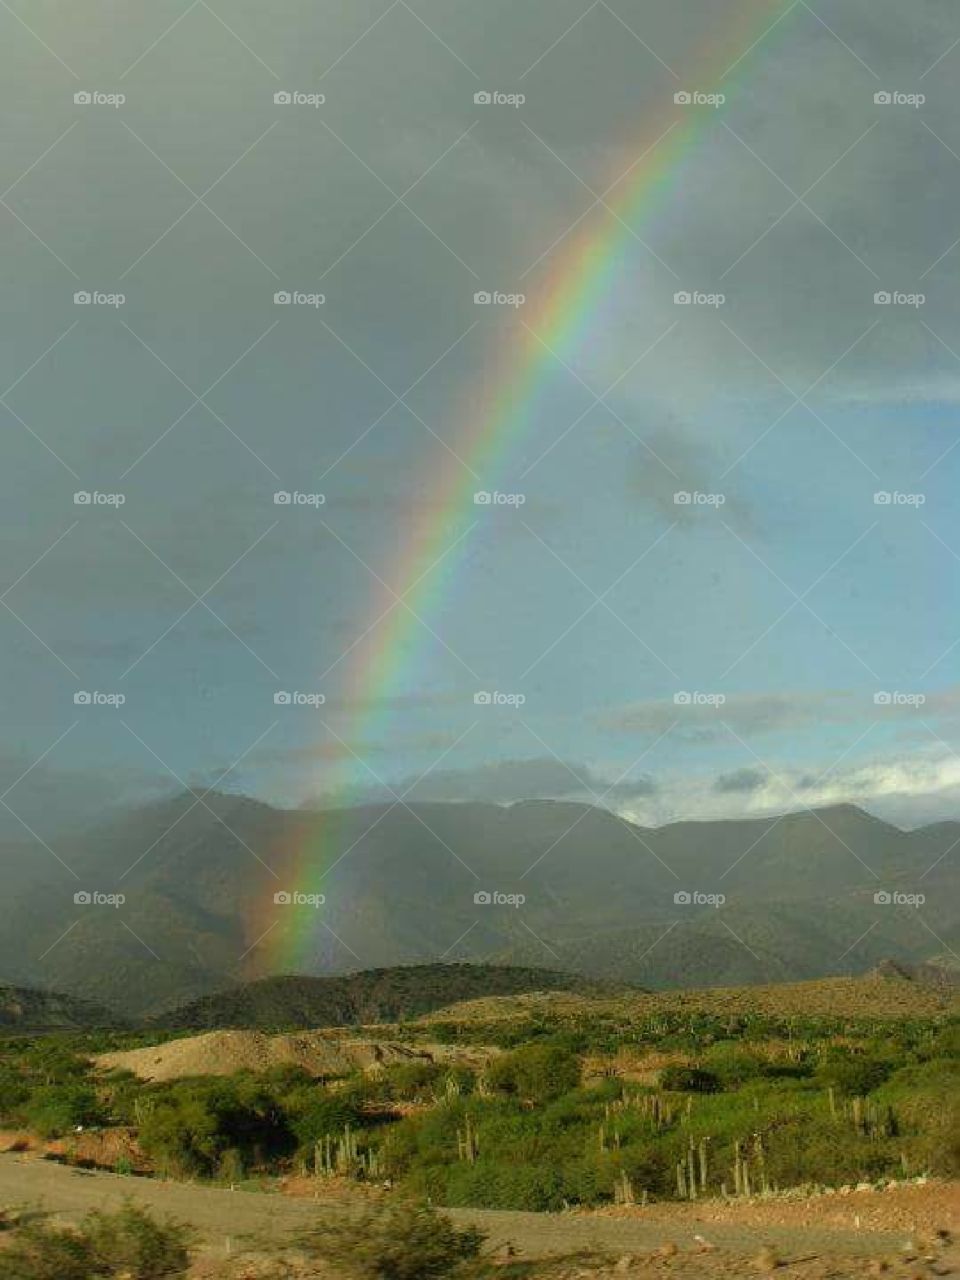 Rainbows in south america